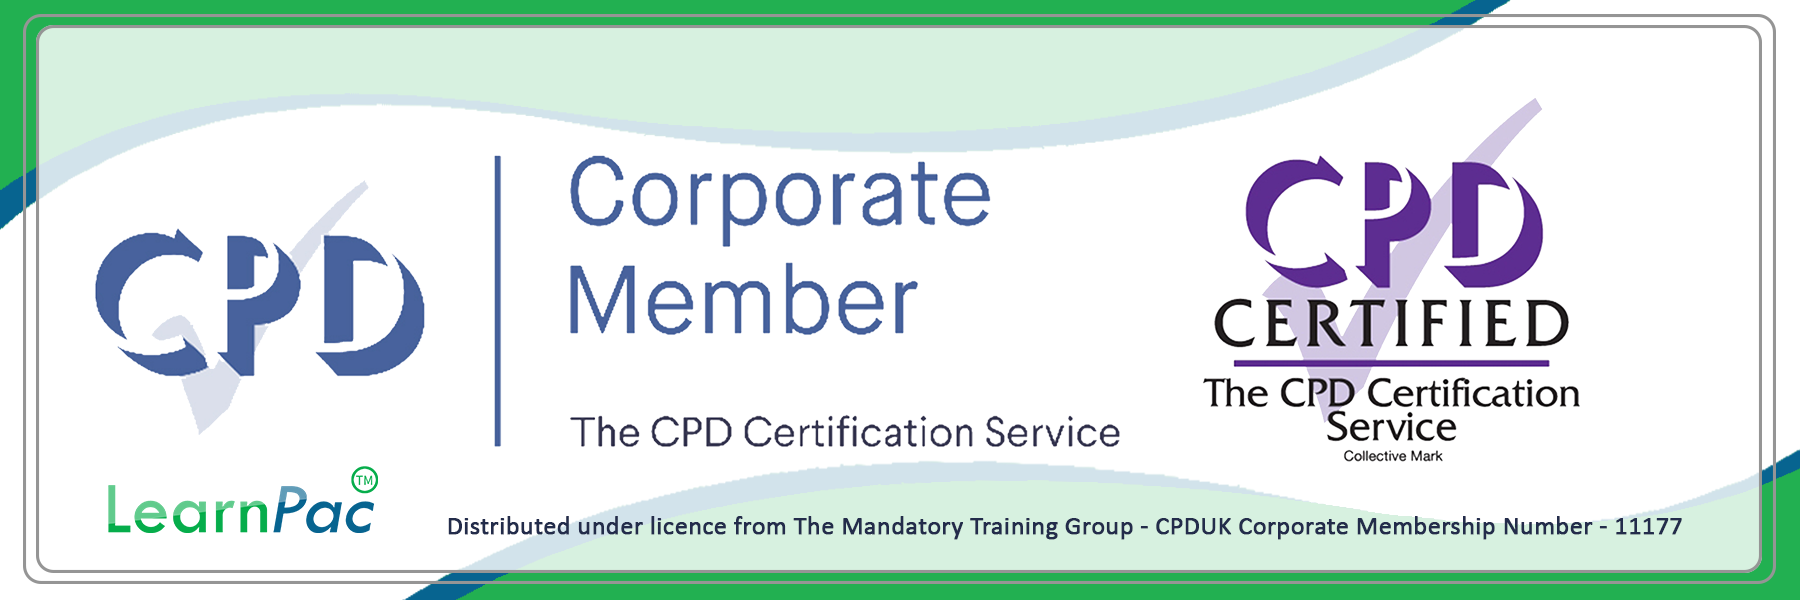 Infection Prevention and Control - E-Learning Courses with Certificates - CPD Certified - LearnPac Systems UK -